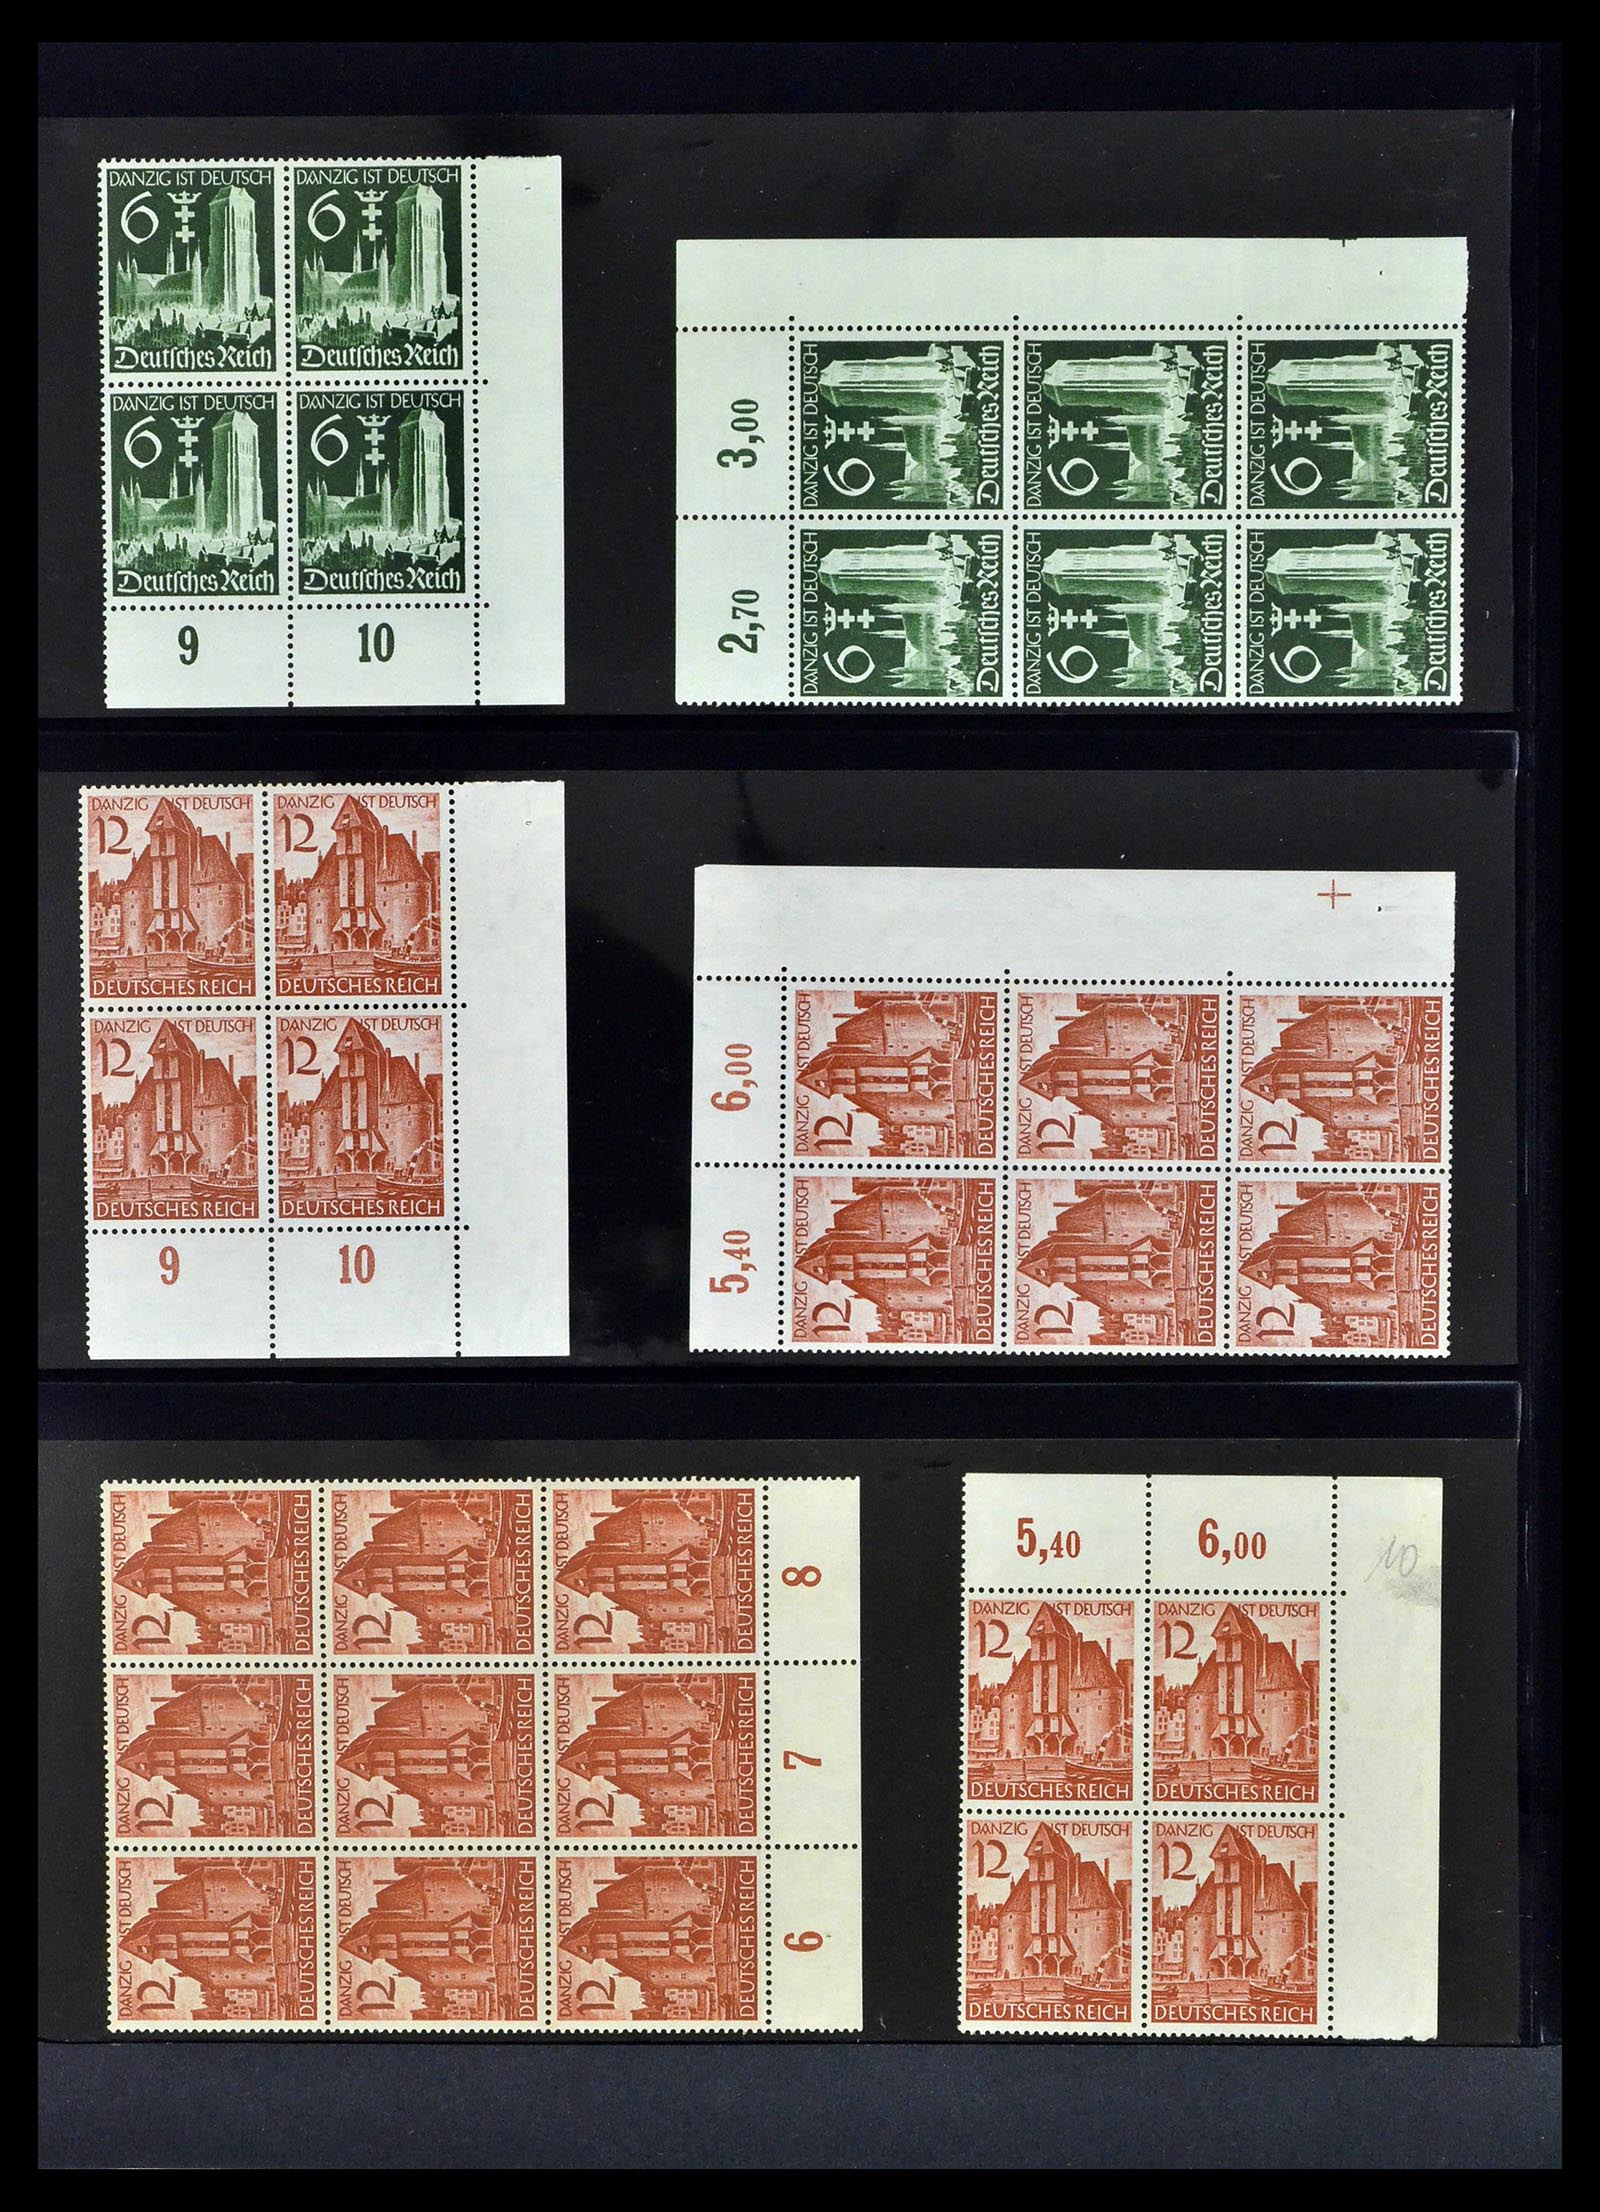 39255 0020 - Stamp collection 39255 German Reich MNH blocks of 4.